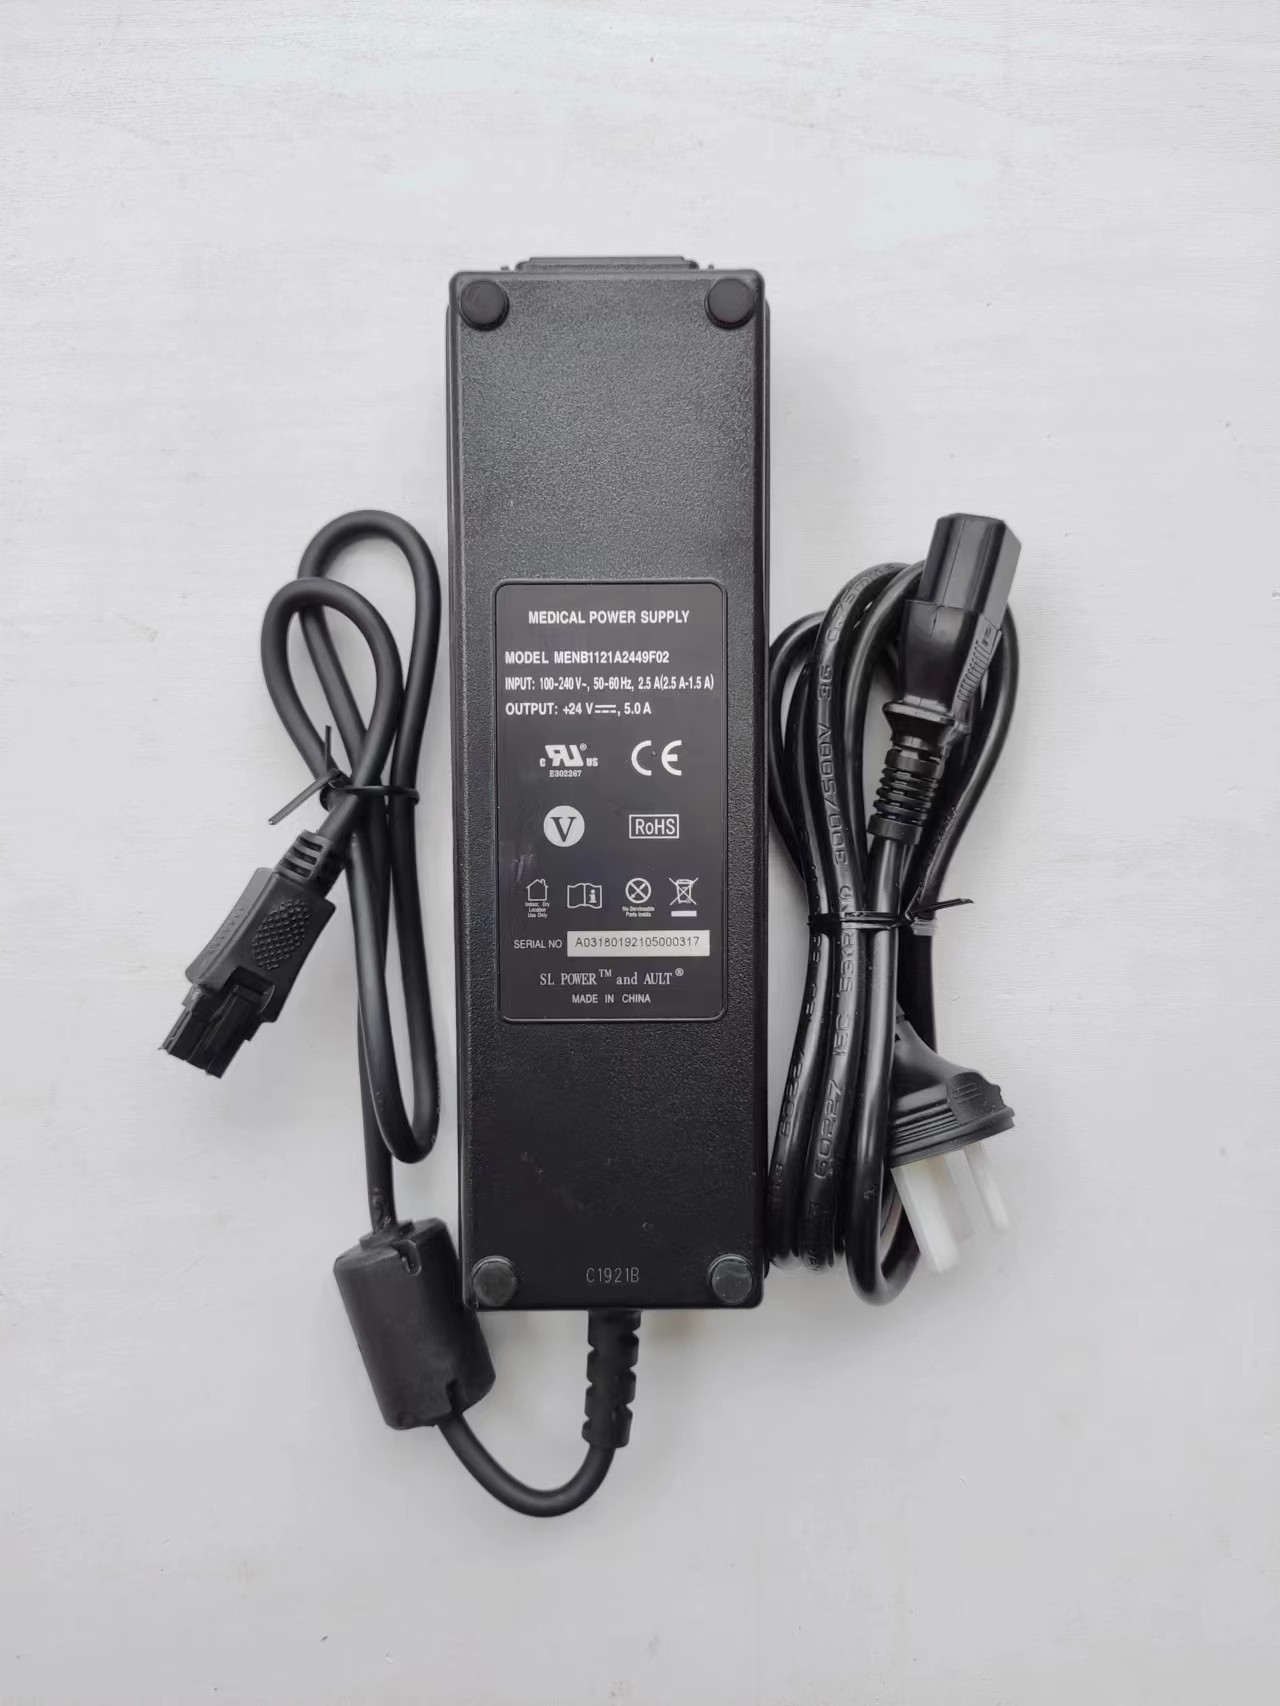 *Brand NEW*MEDICAL MENB1121A2449F02 24V 5.0A AC/DC AC ADAPTER POWER Supply